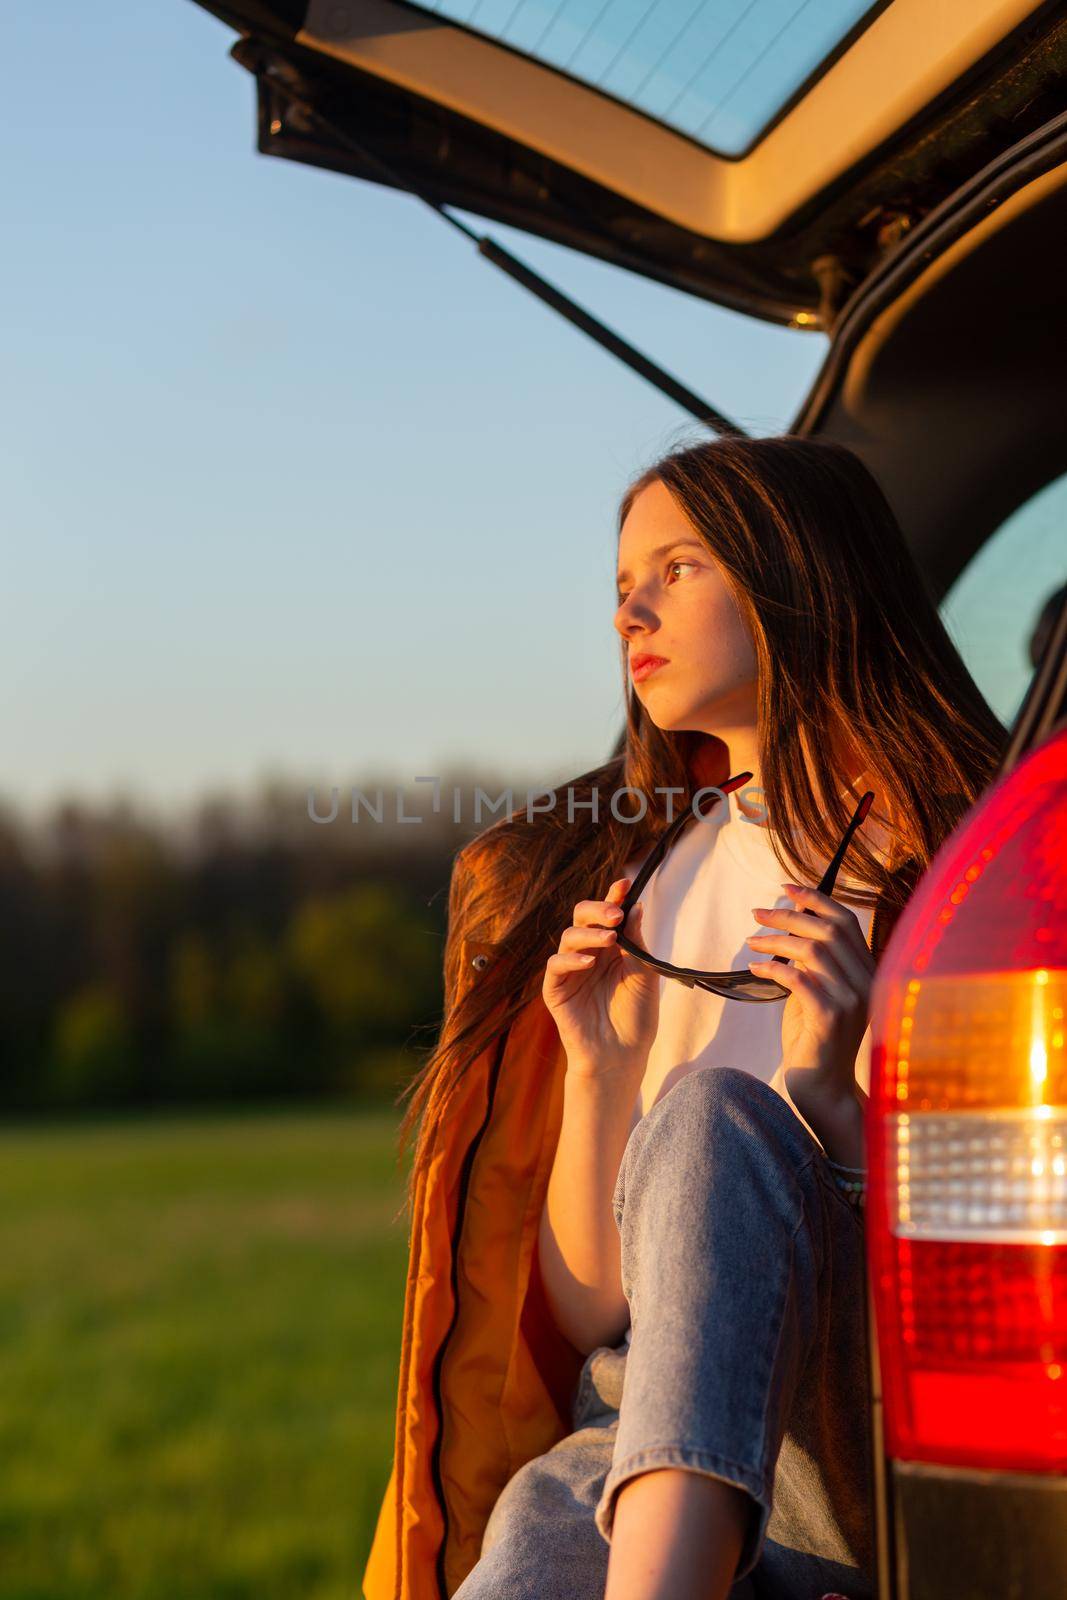 Pretty sad teenage girl with sun glasses sitting alone in a car trunk. by BY-_-BY